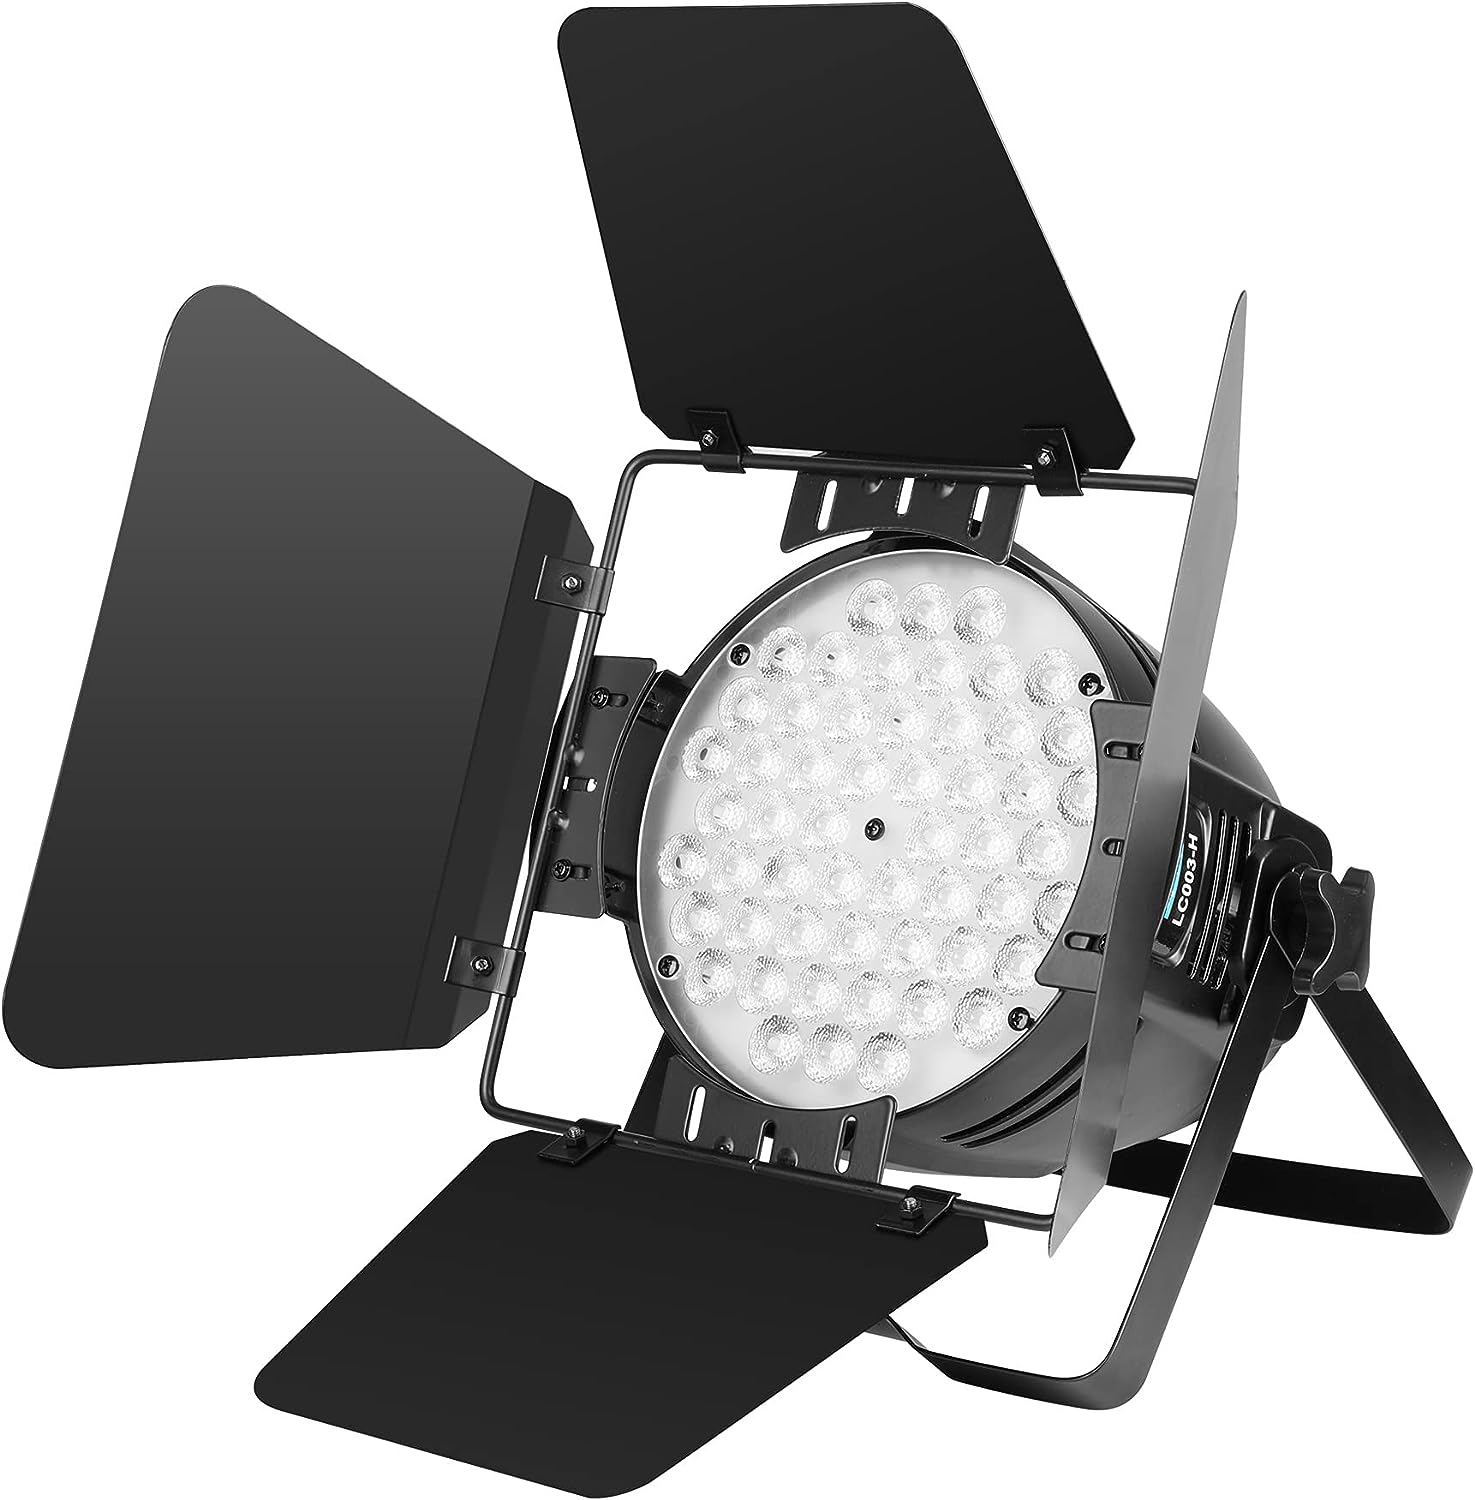 Top DMX Lighting Brands and Models for Photography Studios